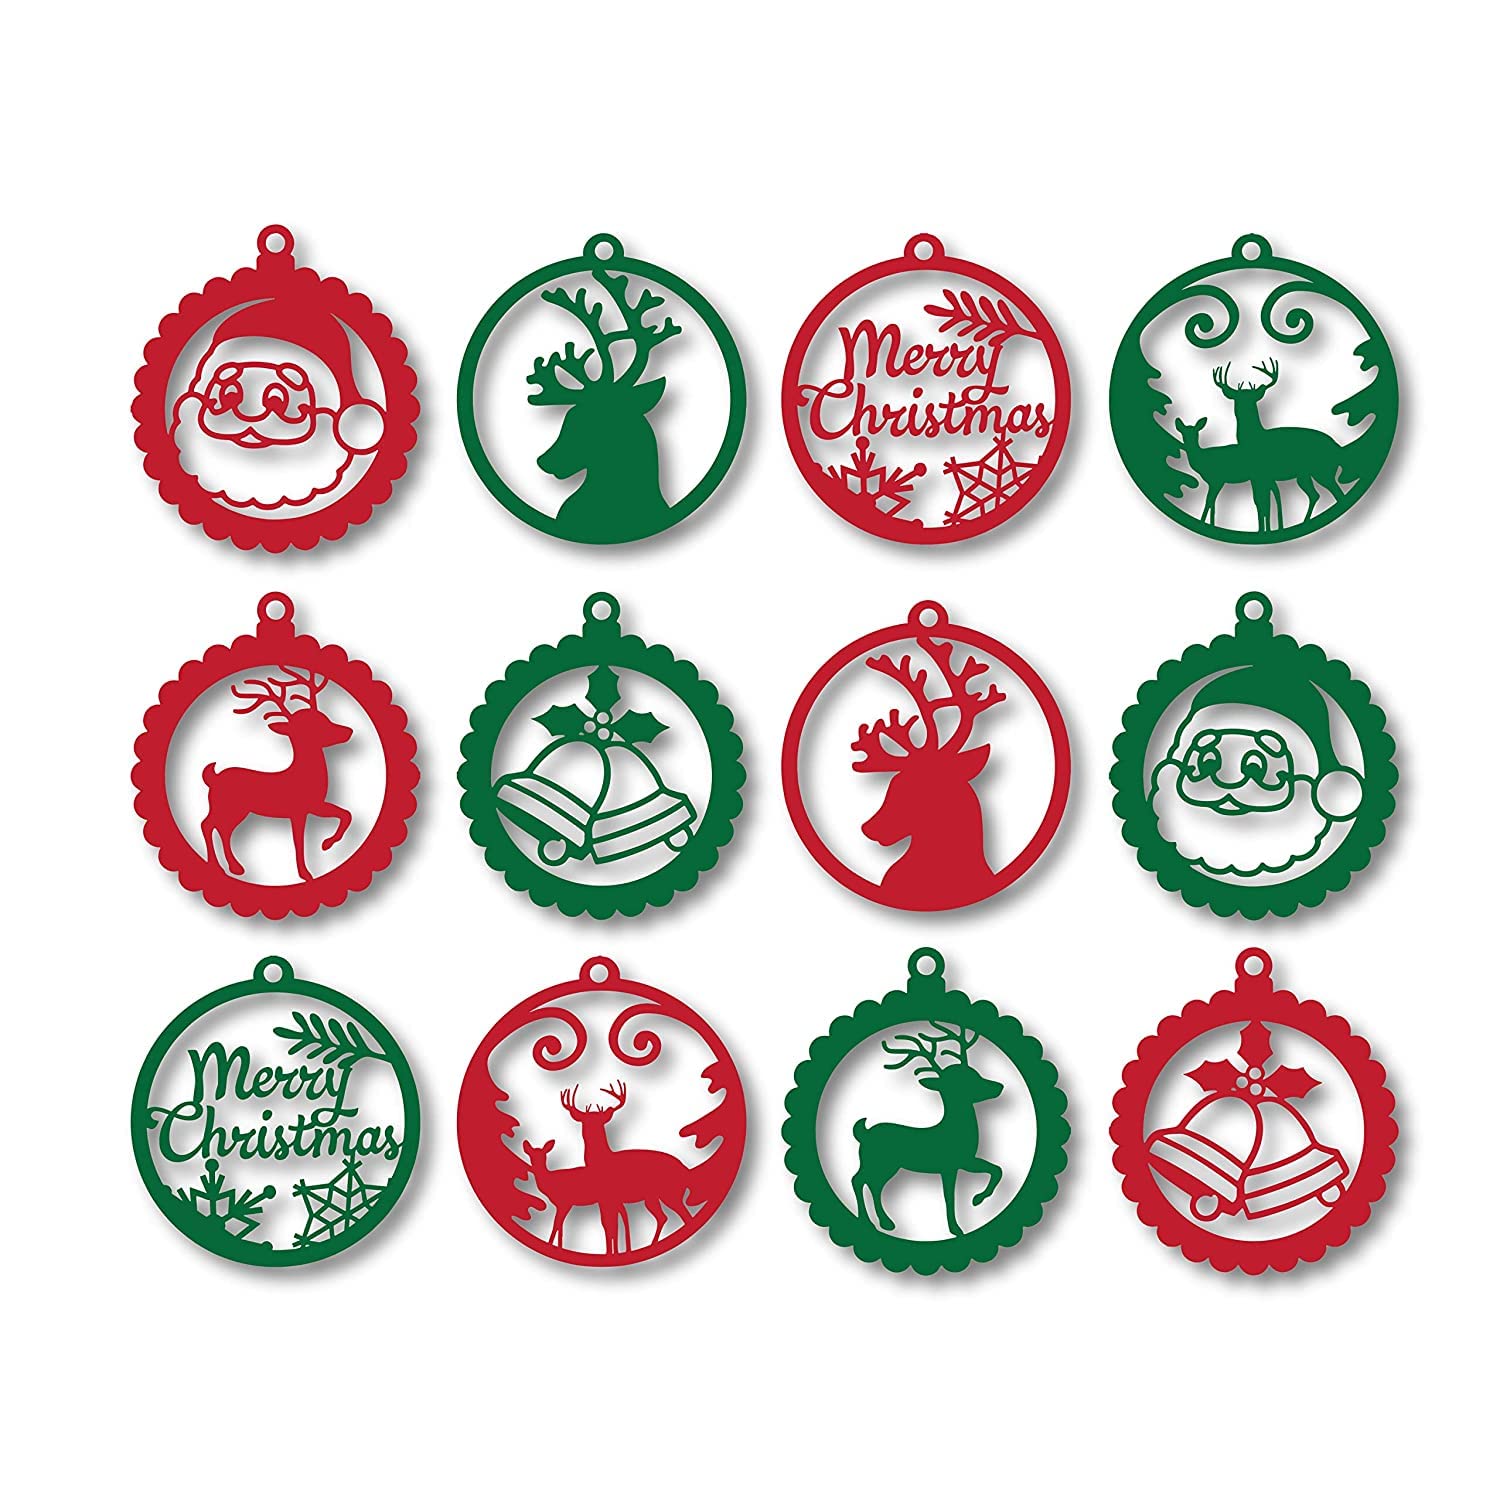 eCraftIndia Red & Green Santa Claus, Reindeer, Merry Christmas, Bells, Snowflake, Christmas Tree MDF Wooden Cutout Christmas Tree Decoration Hanging Items (Set of 12)